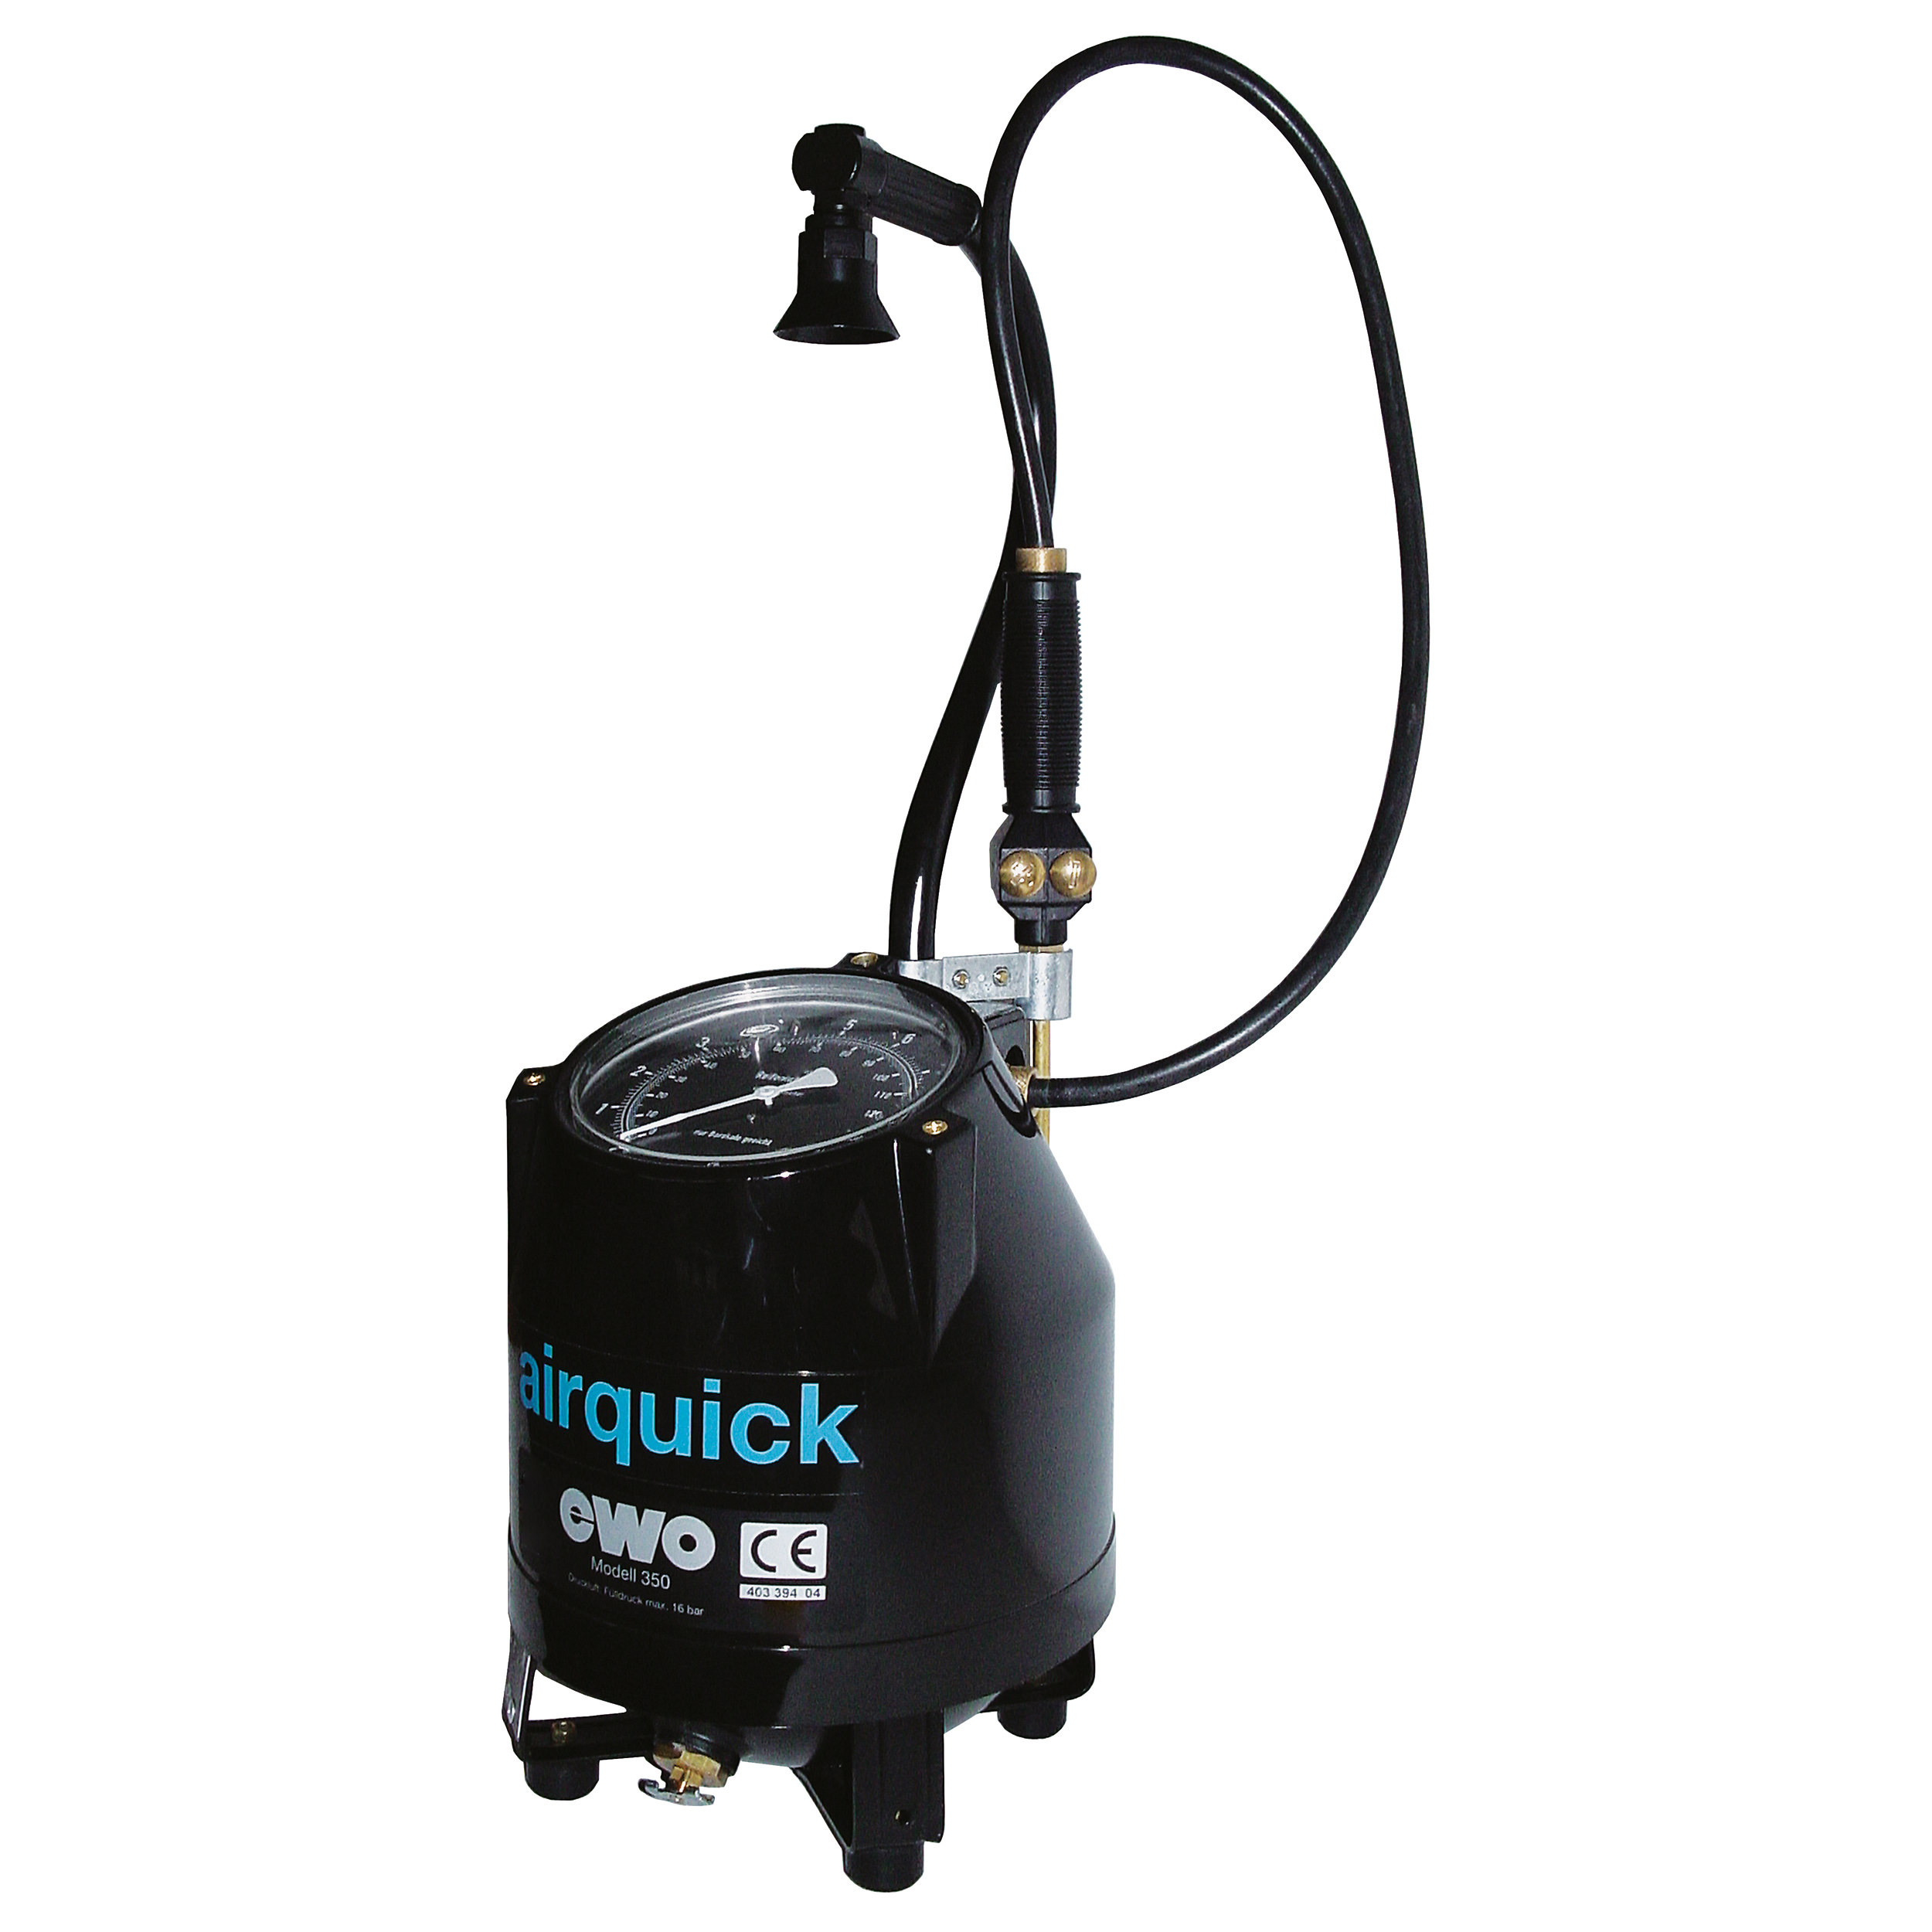 Portable tire inflator airquick, air tank 6 litre, gauge Ø160 mm, filling valve, 0–145 psi, twin hold-on connector, uncalibr.